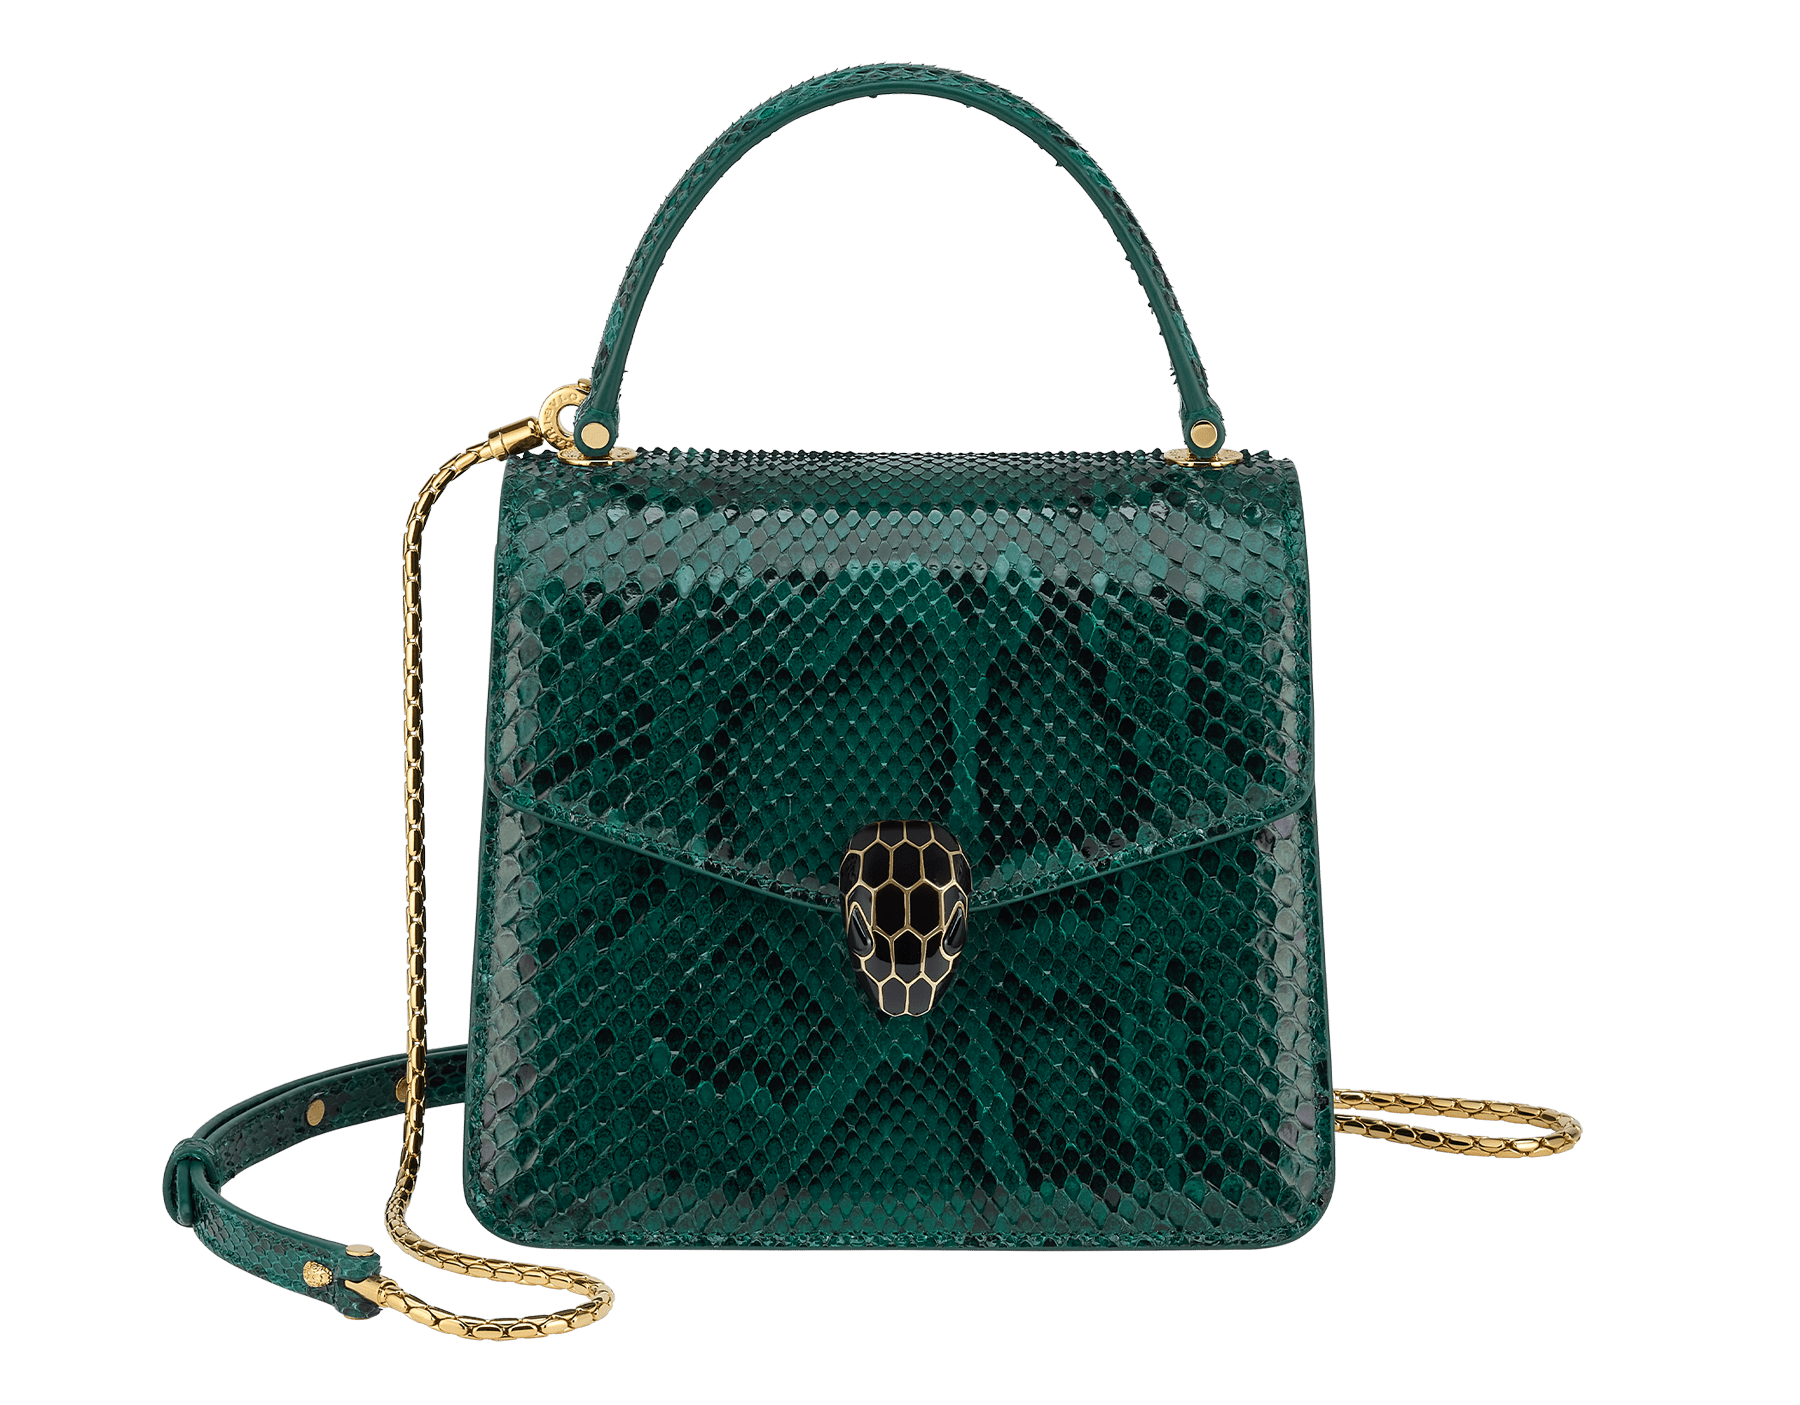 Serpenti Forever top handle bag in multicolour Early Bright python skin with caramel topaz beige nappa leather lining. Captivating snakehead closure in light gold-plated brass embellished with black and caramel topaz beige enamel scales and black onyx eyes. 1122-P image 1